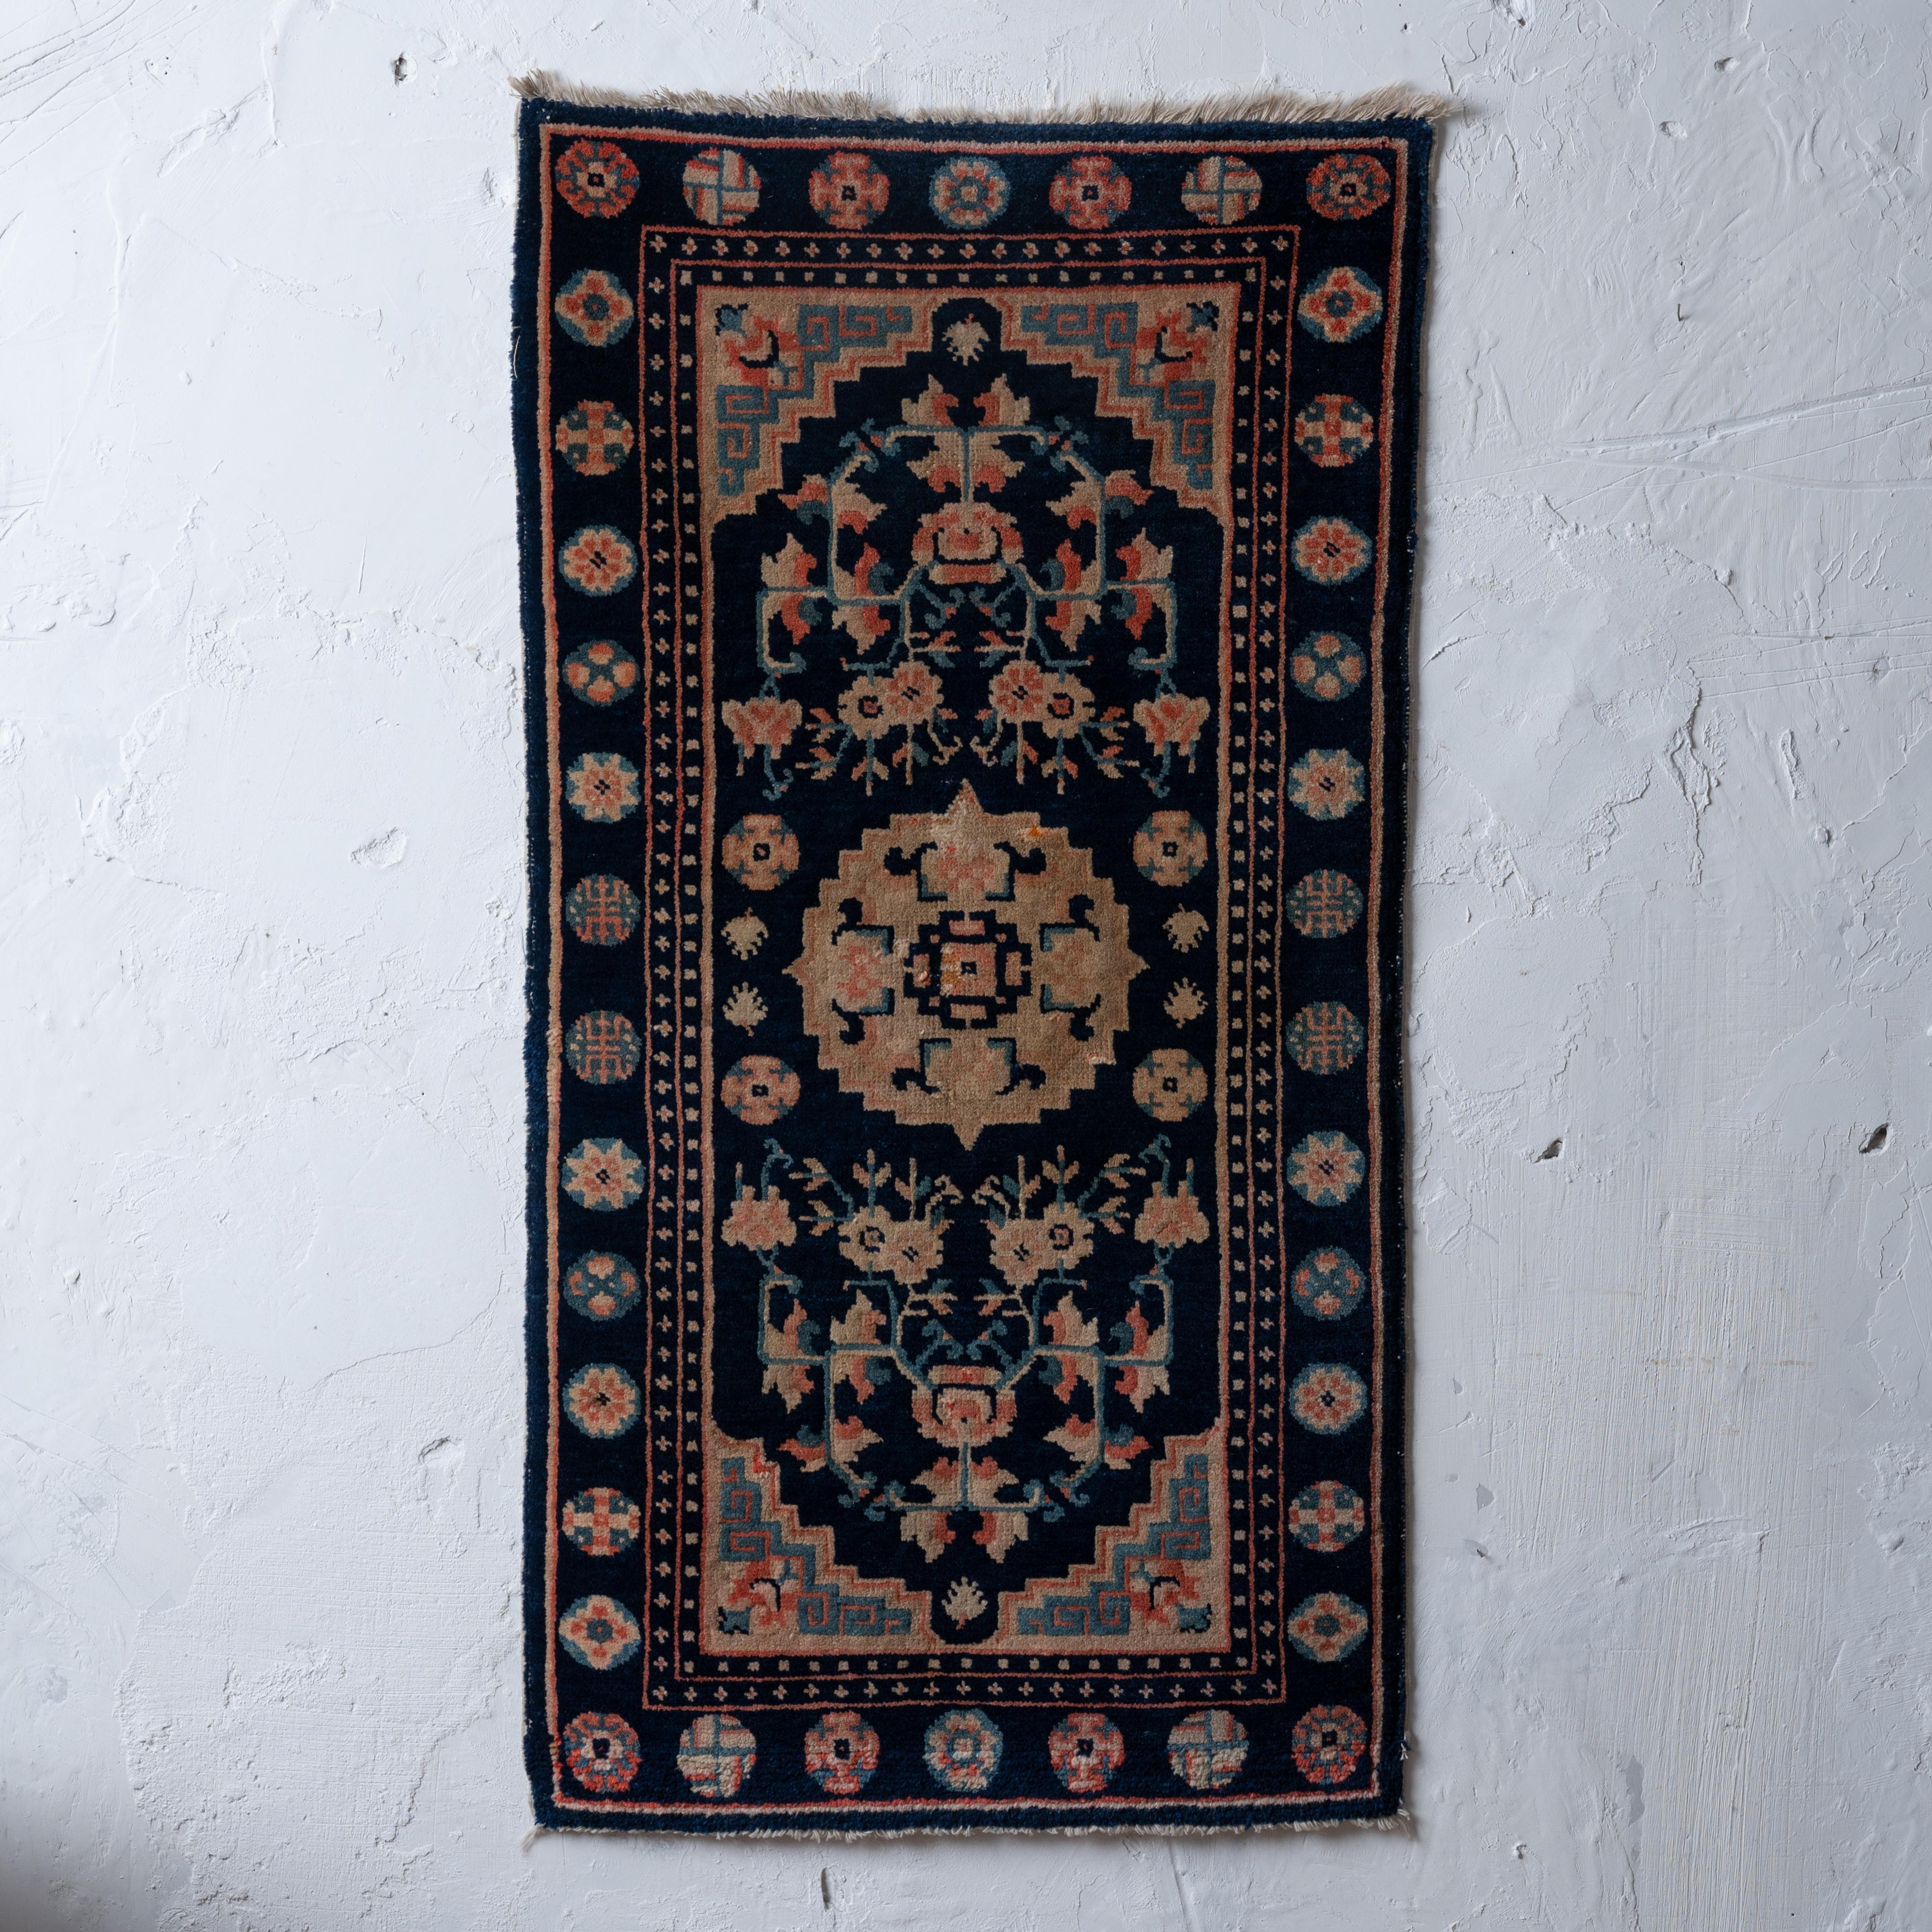 A small Chinese Peking rug, circa 1890s.

22 by 42 inches